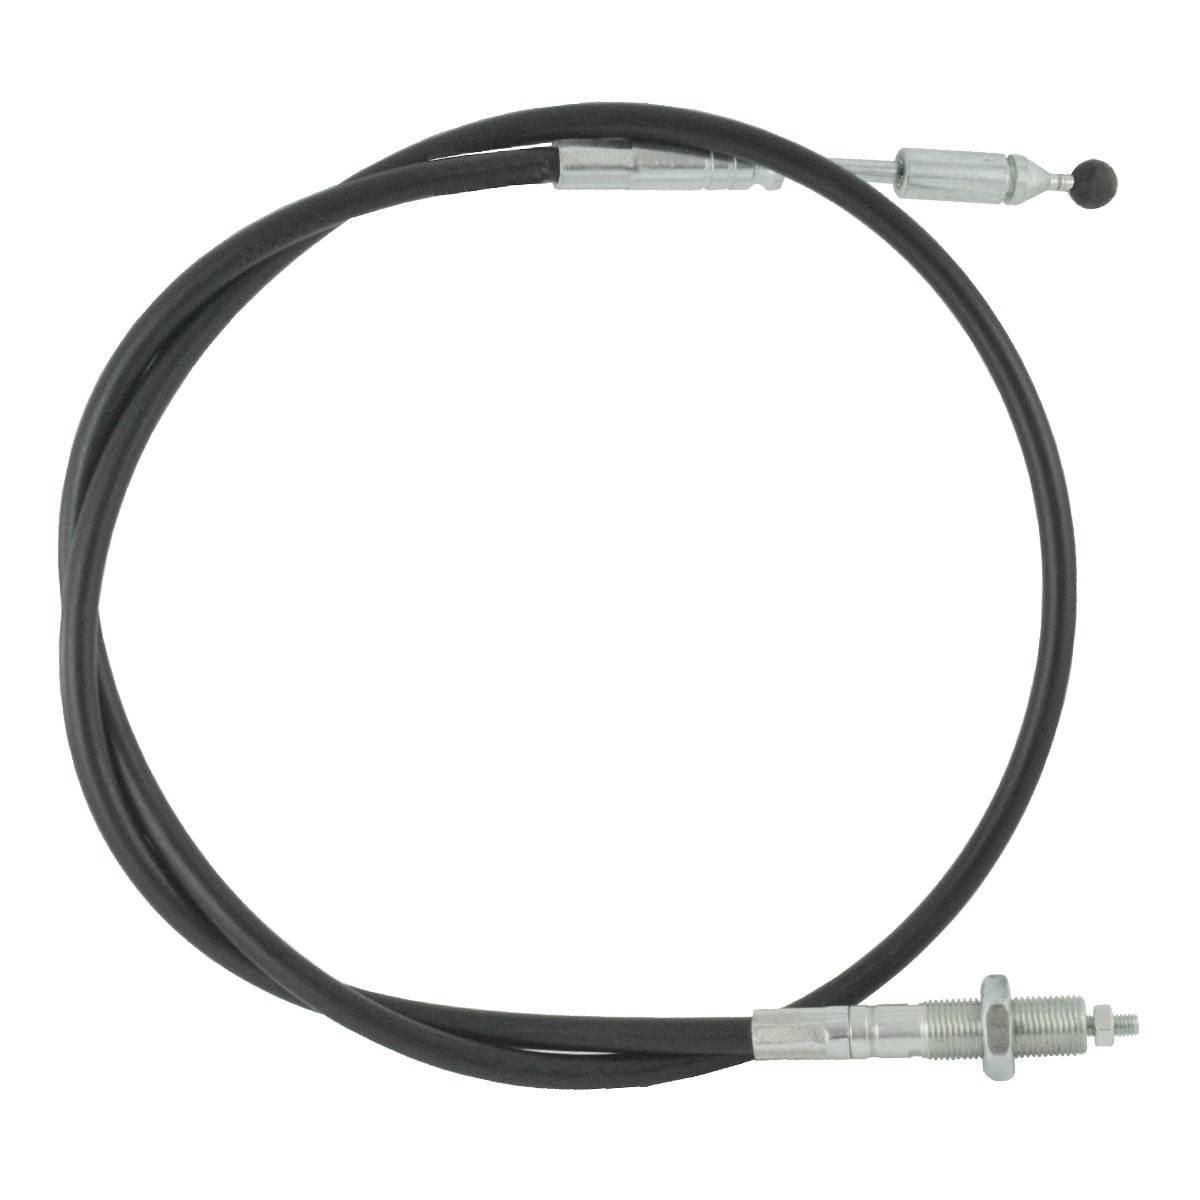 Hydraulic distributor cable with 900 mm joystick